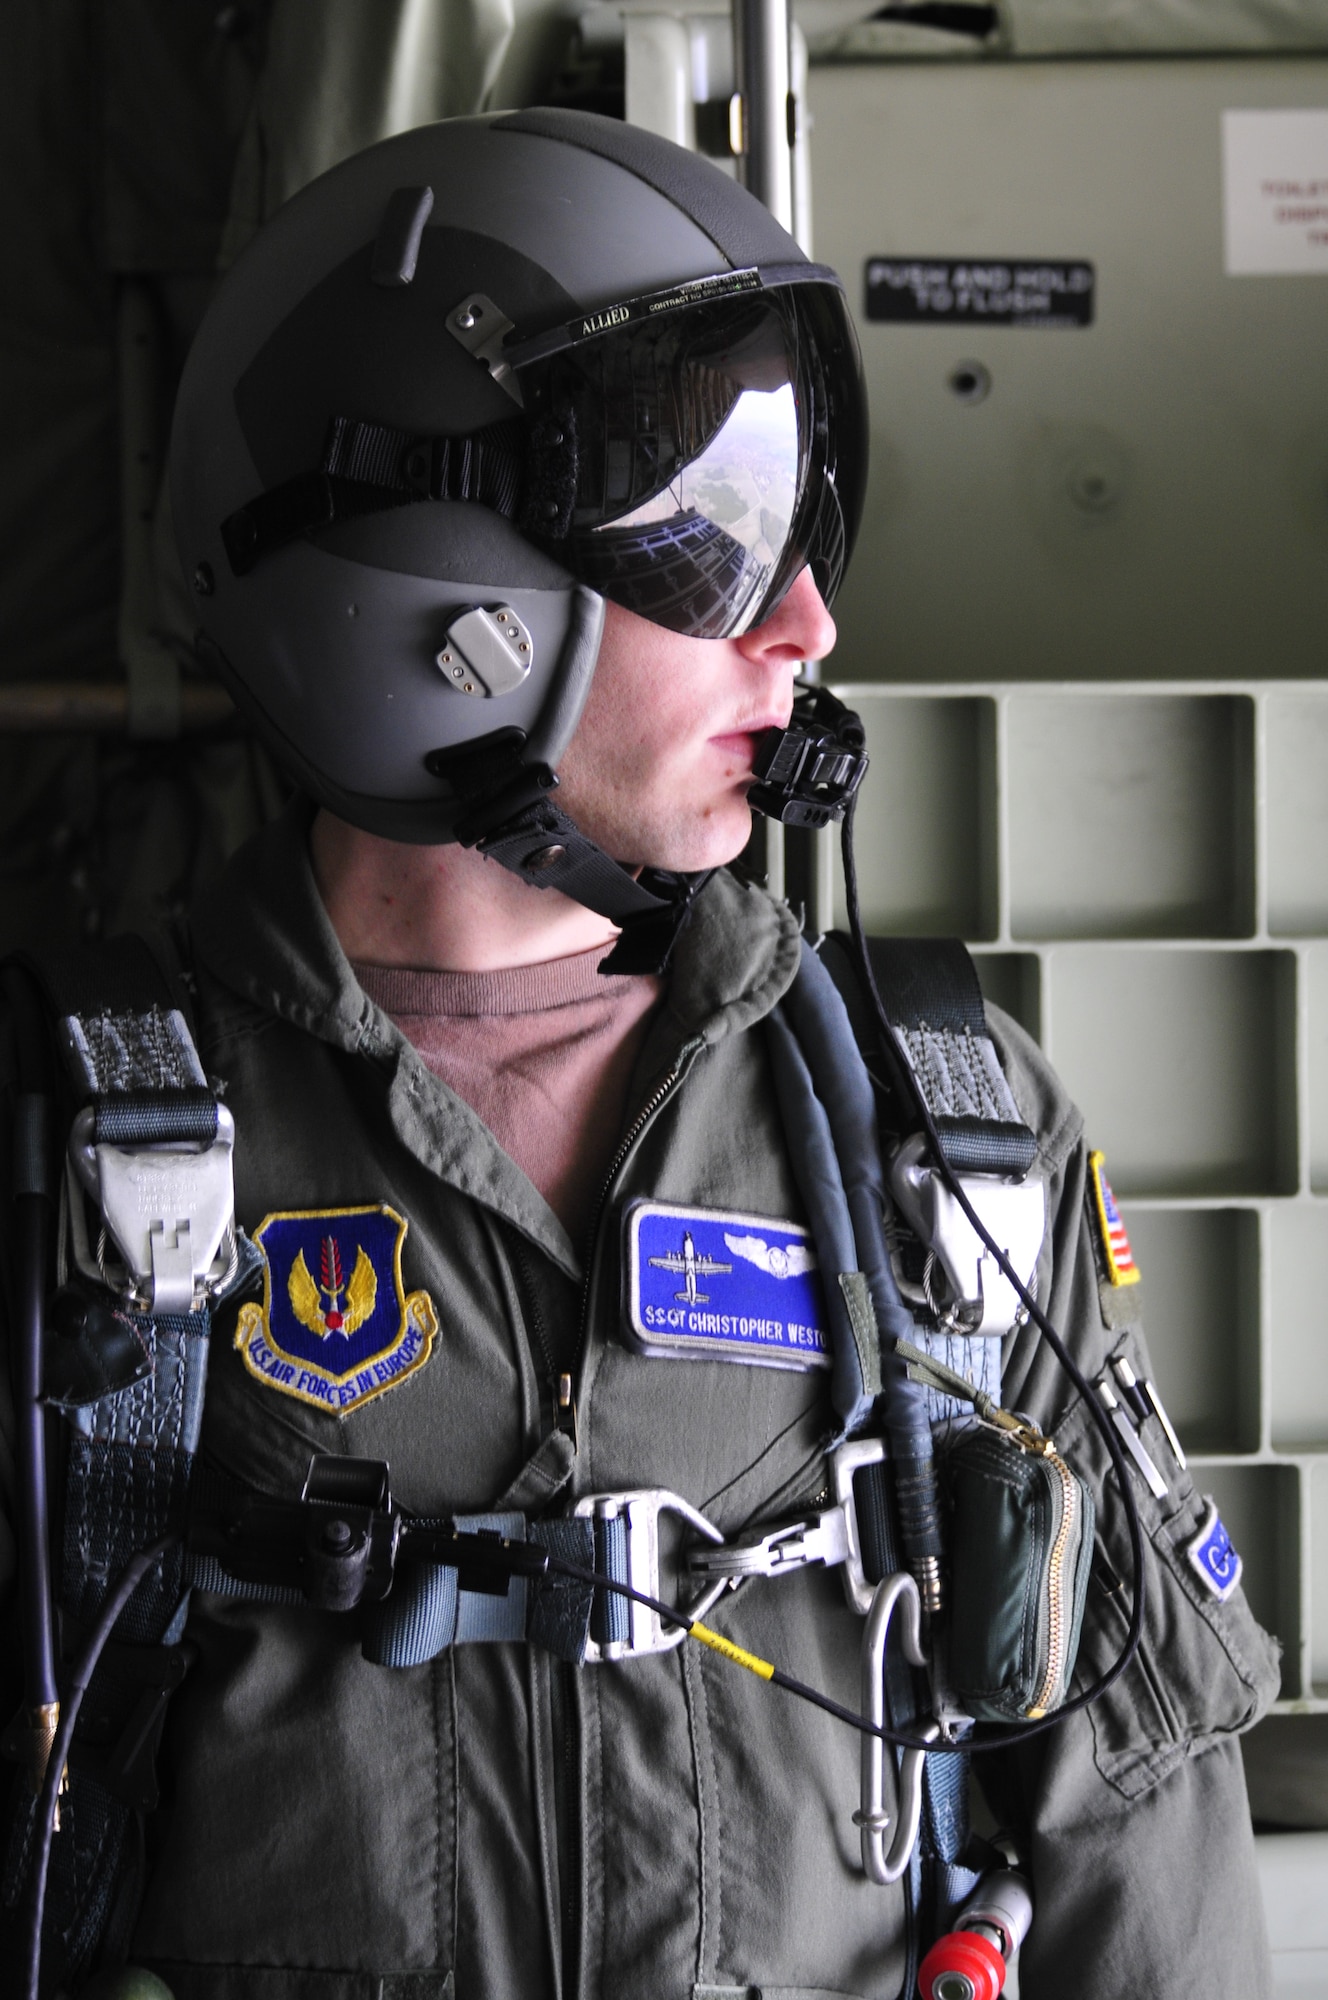 U.S. Air Force Staff Sgt. Christopher Weston, 37th Airlift Squadron loadmaster, takes in the terrain of Plovdiv, Bulgaria, as seen from the rear of a C-130J Super Hercules flying 11,000 feet above sea-level. Sergeant Weston is deployed to Bulgaria to support Thracian Fall 2010, a two week on-site training deployment designed to build partnership between the U.S. and Bulgarian Air Force. During Thracian Fall U.S. paratroopers were able to assist 1077 Bulgarian Airmen receive valuable jump training. (U.S. Air Force photo by Tech. Sgt. Michael Voss)